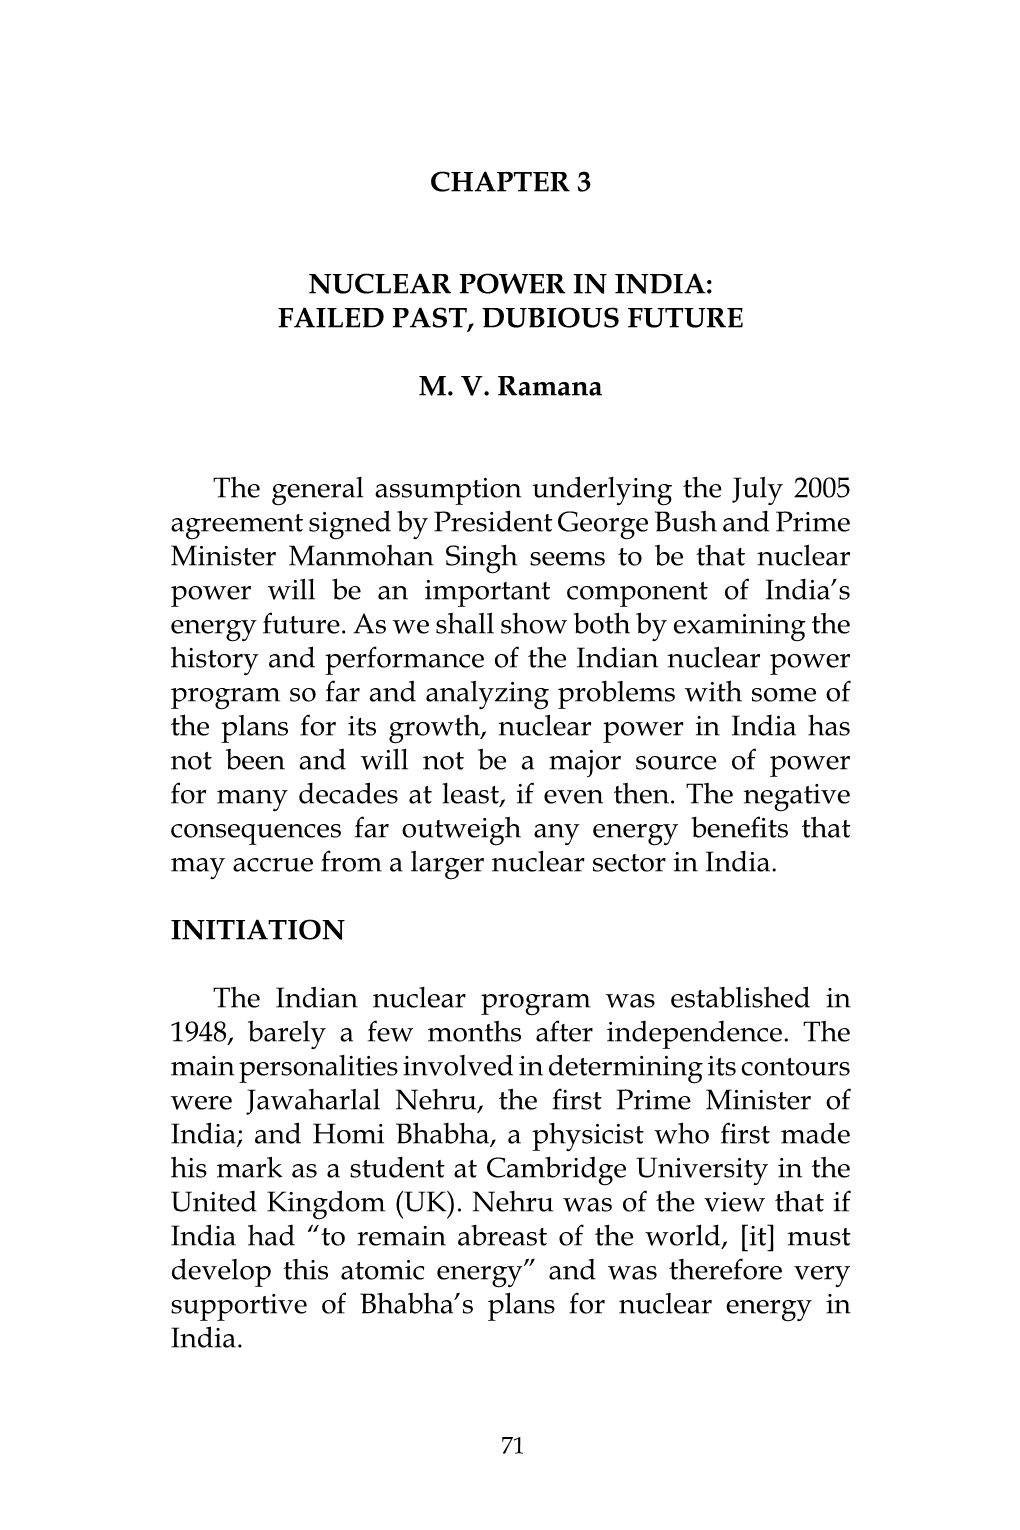 Nuclear Power in India: Failed Past, Dubious Future